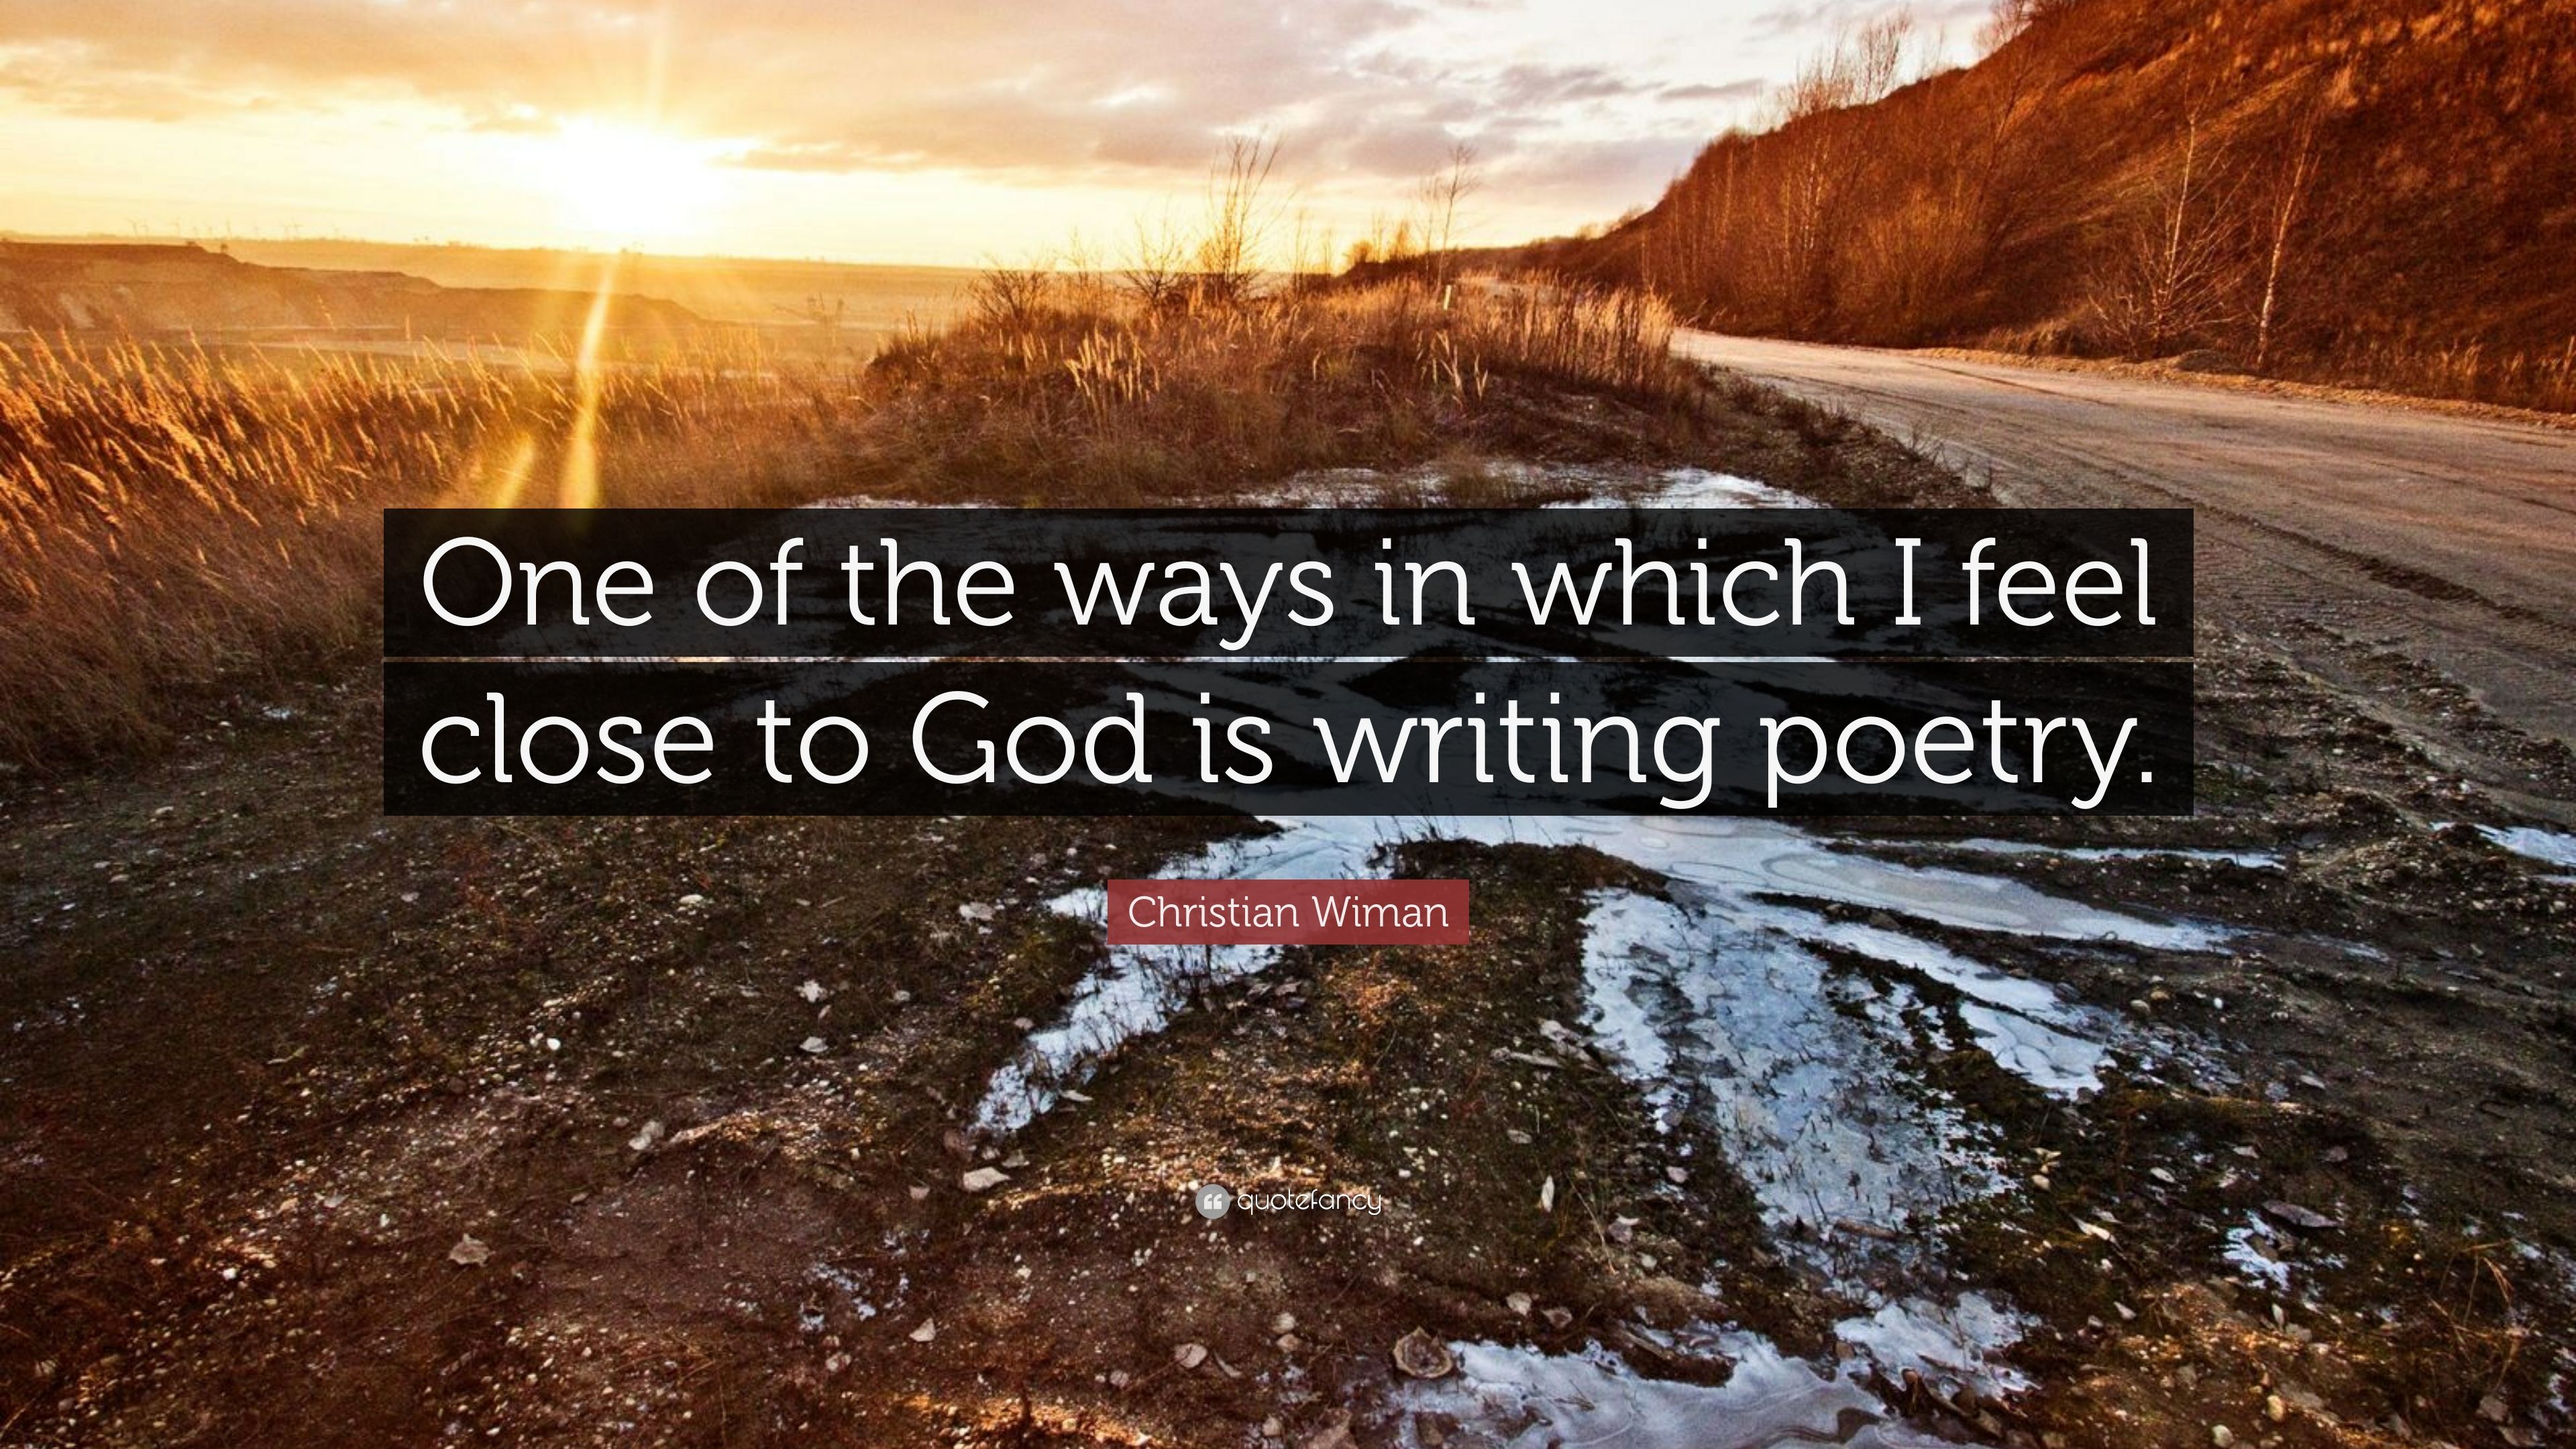 Christian Wiman Quote: “One of the ways in which I feel close to